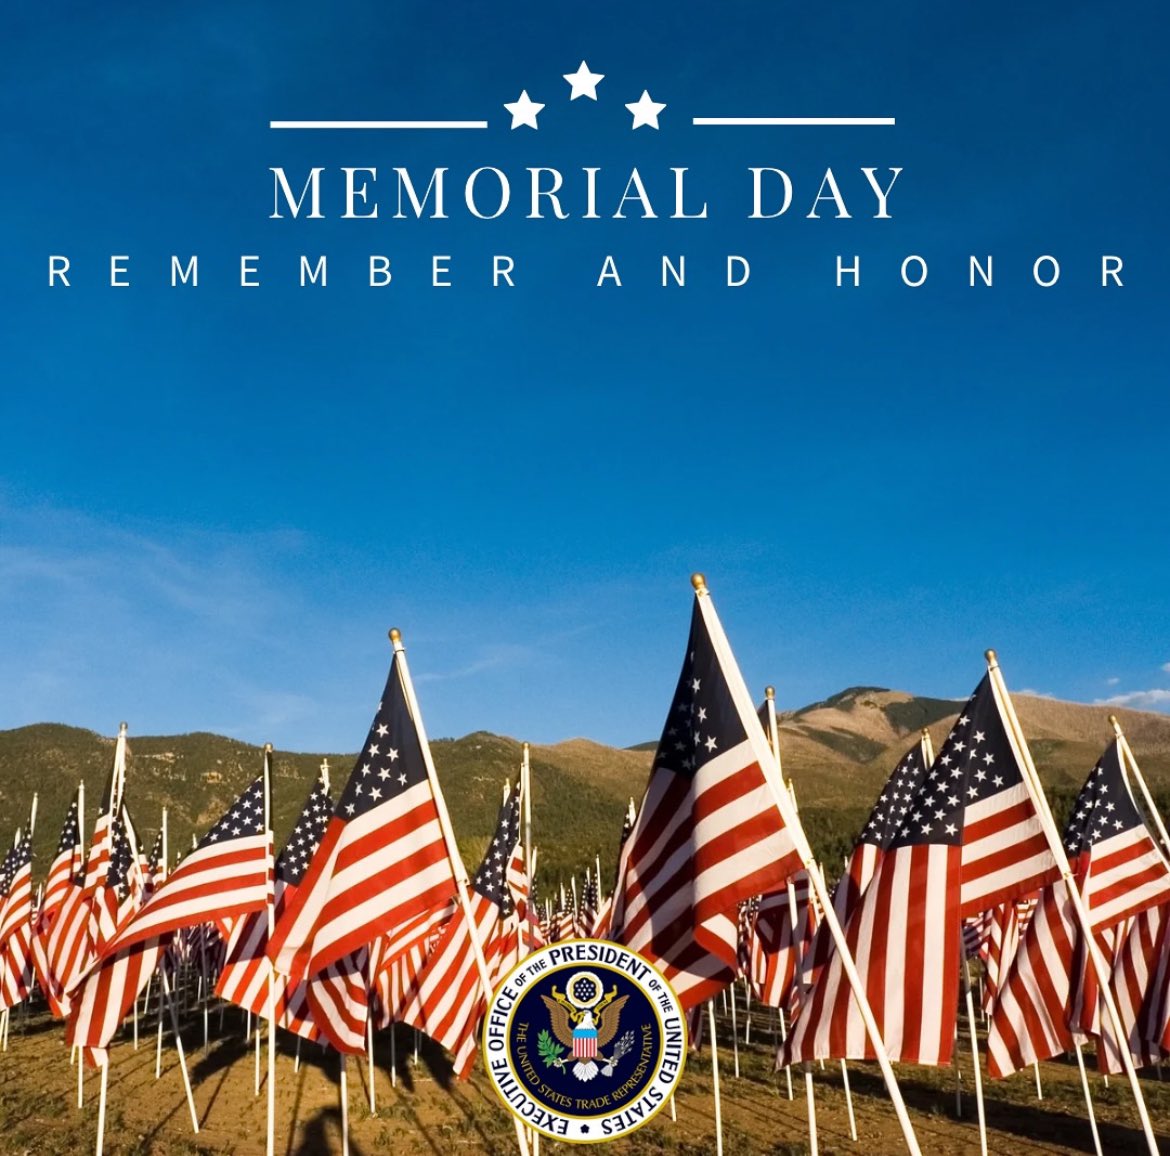 Today we remember and honor our service members who gave their lives to protect our freedom. Wishing everyone a safe #MemorialDay.